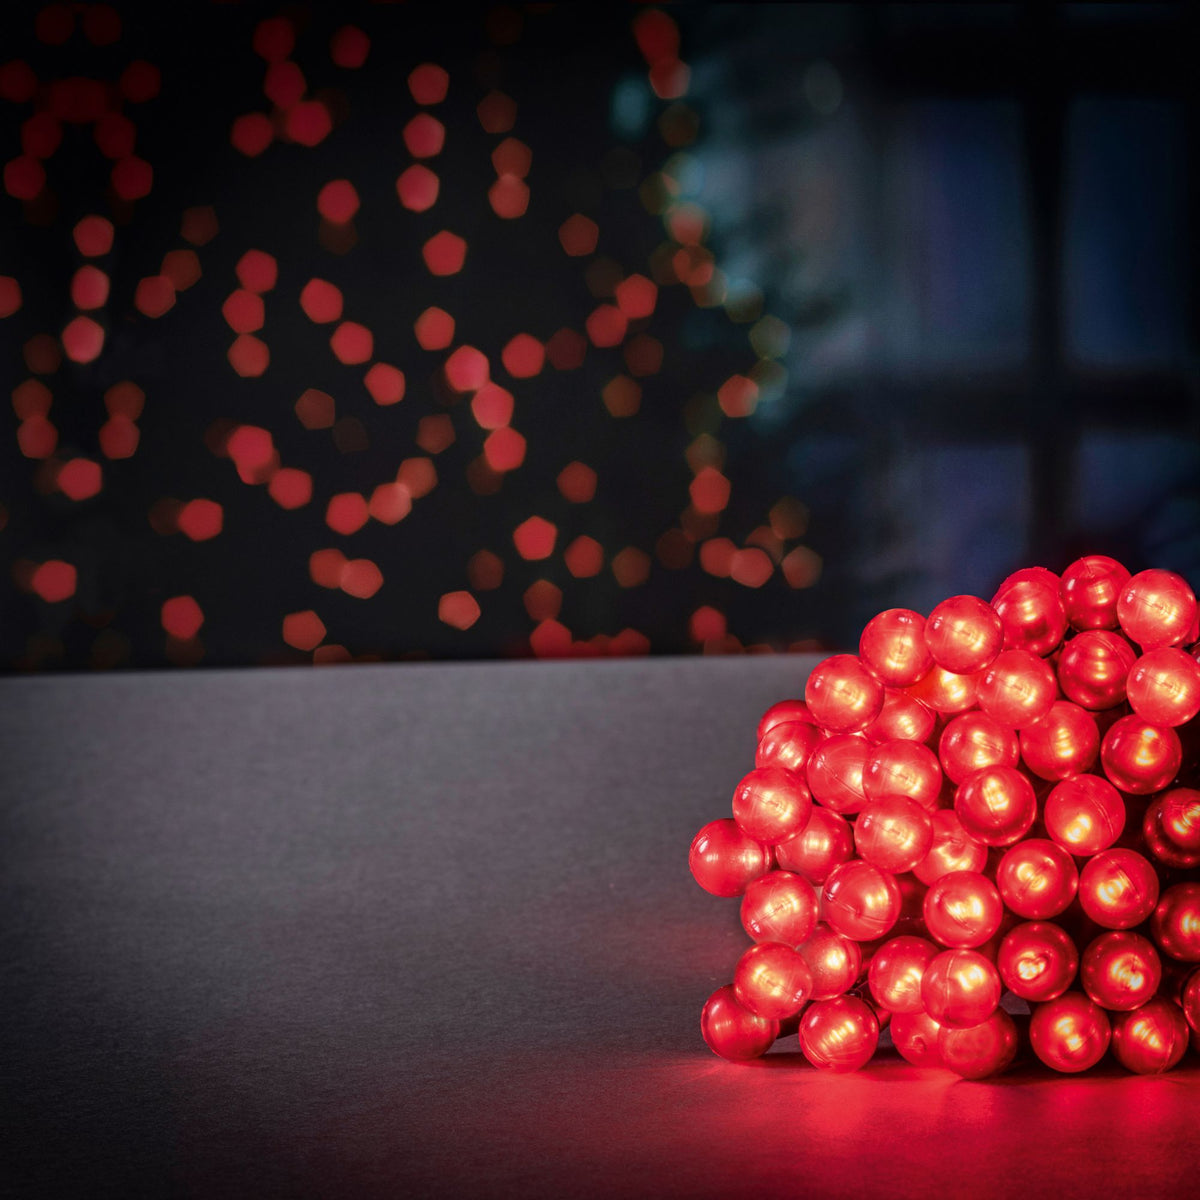 100 Red LED Multi Action Pearl Berry String Lights